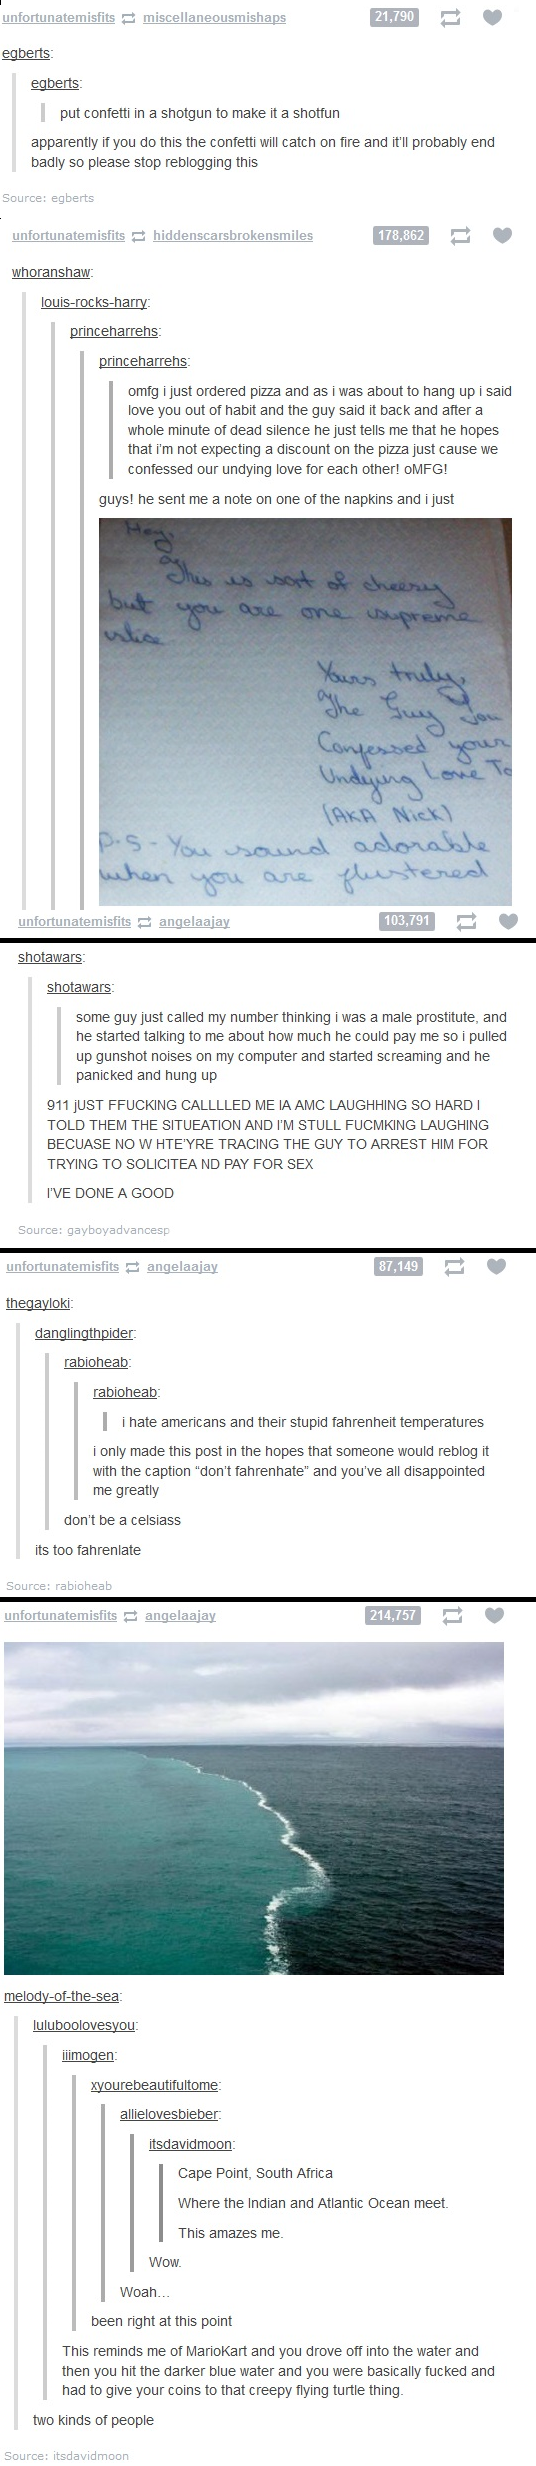 Just a compilation of tumblr gold.